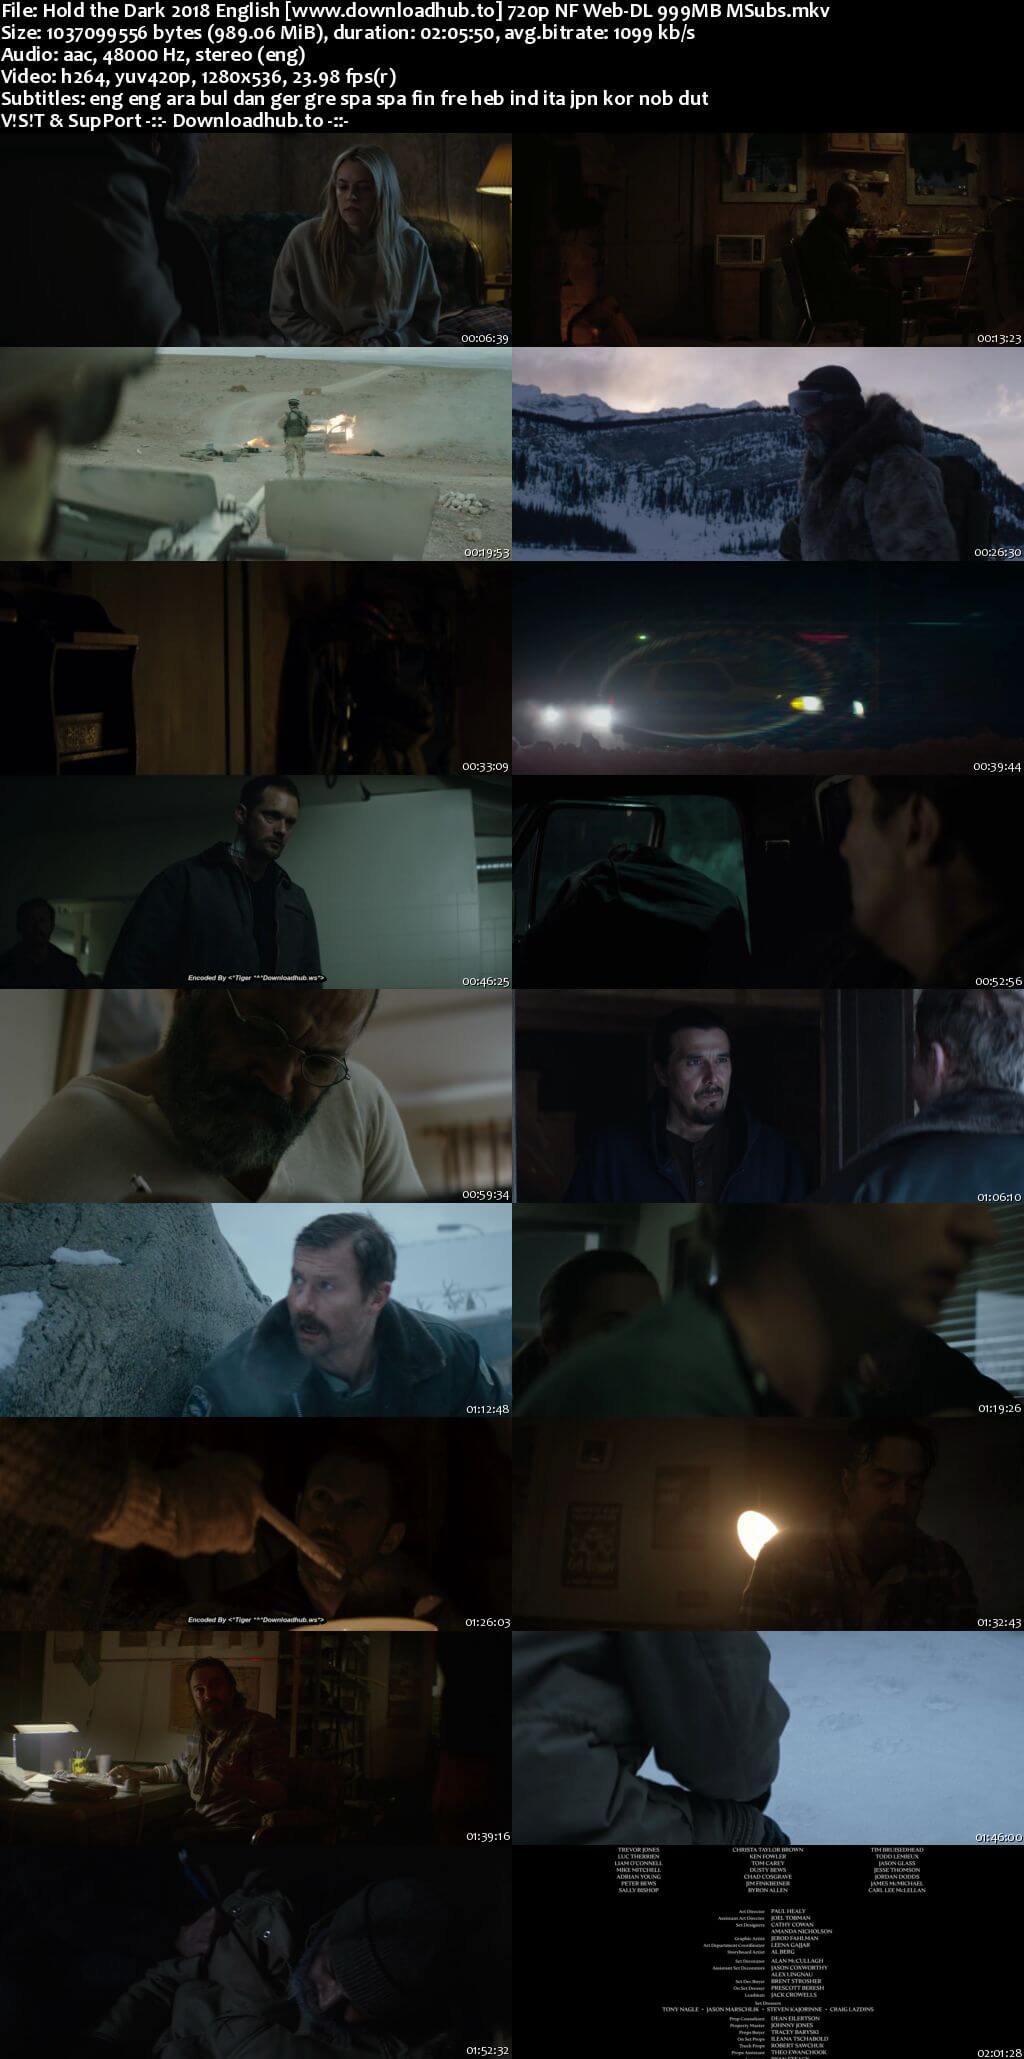 Hold the Dark 2018 English 720p NF Web-DL 999MB MSubs